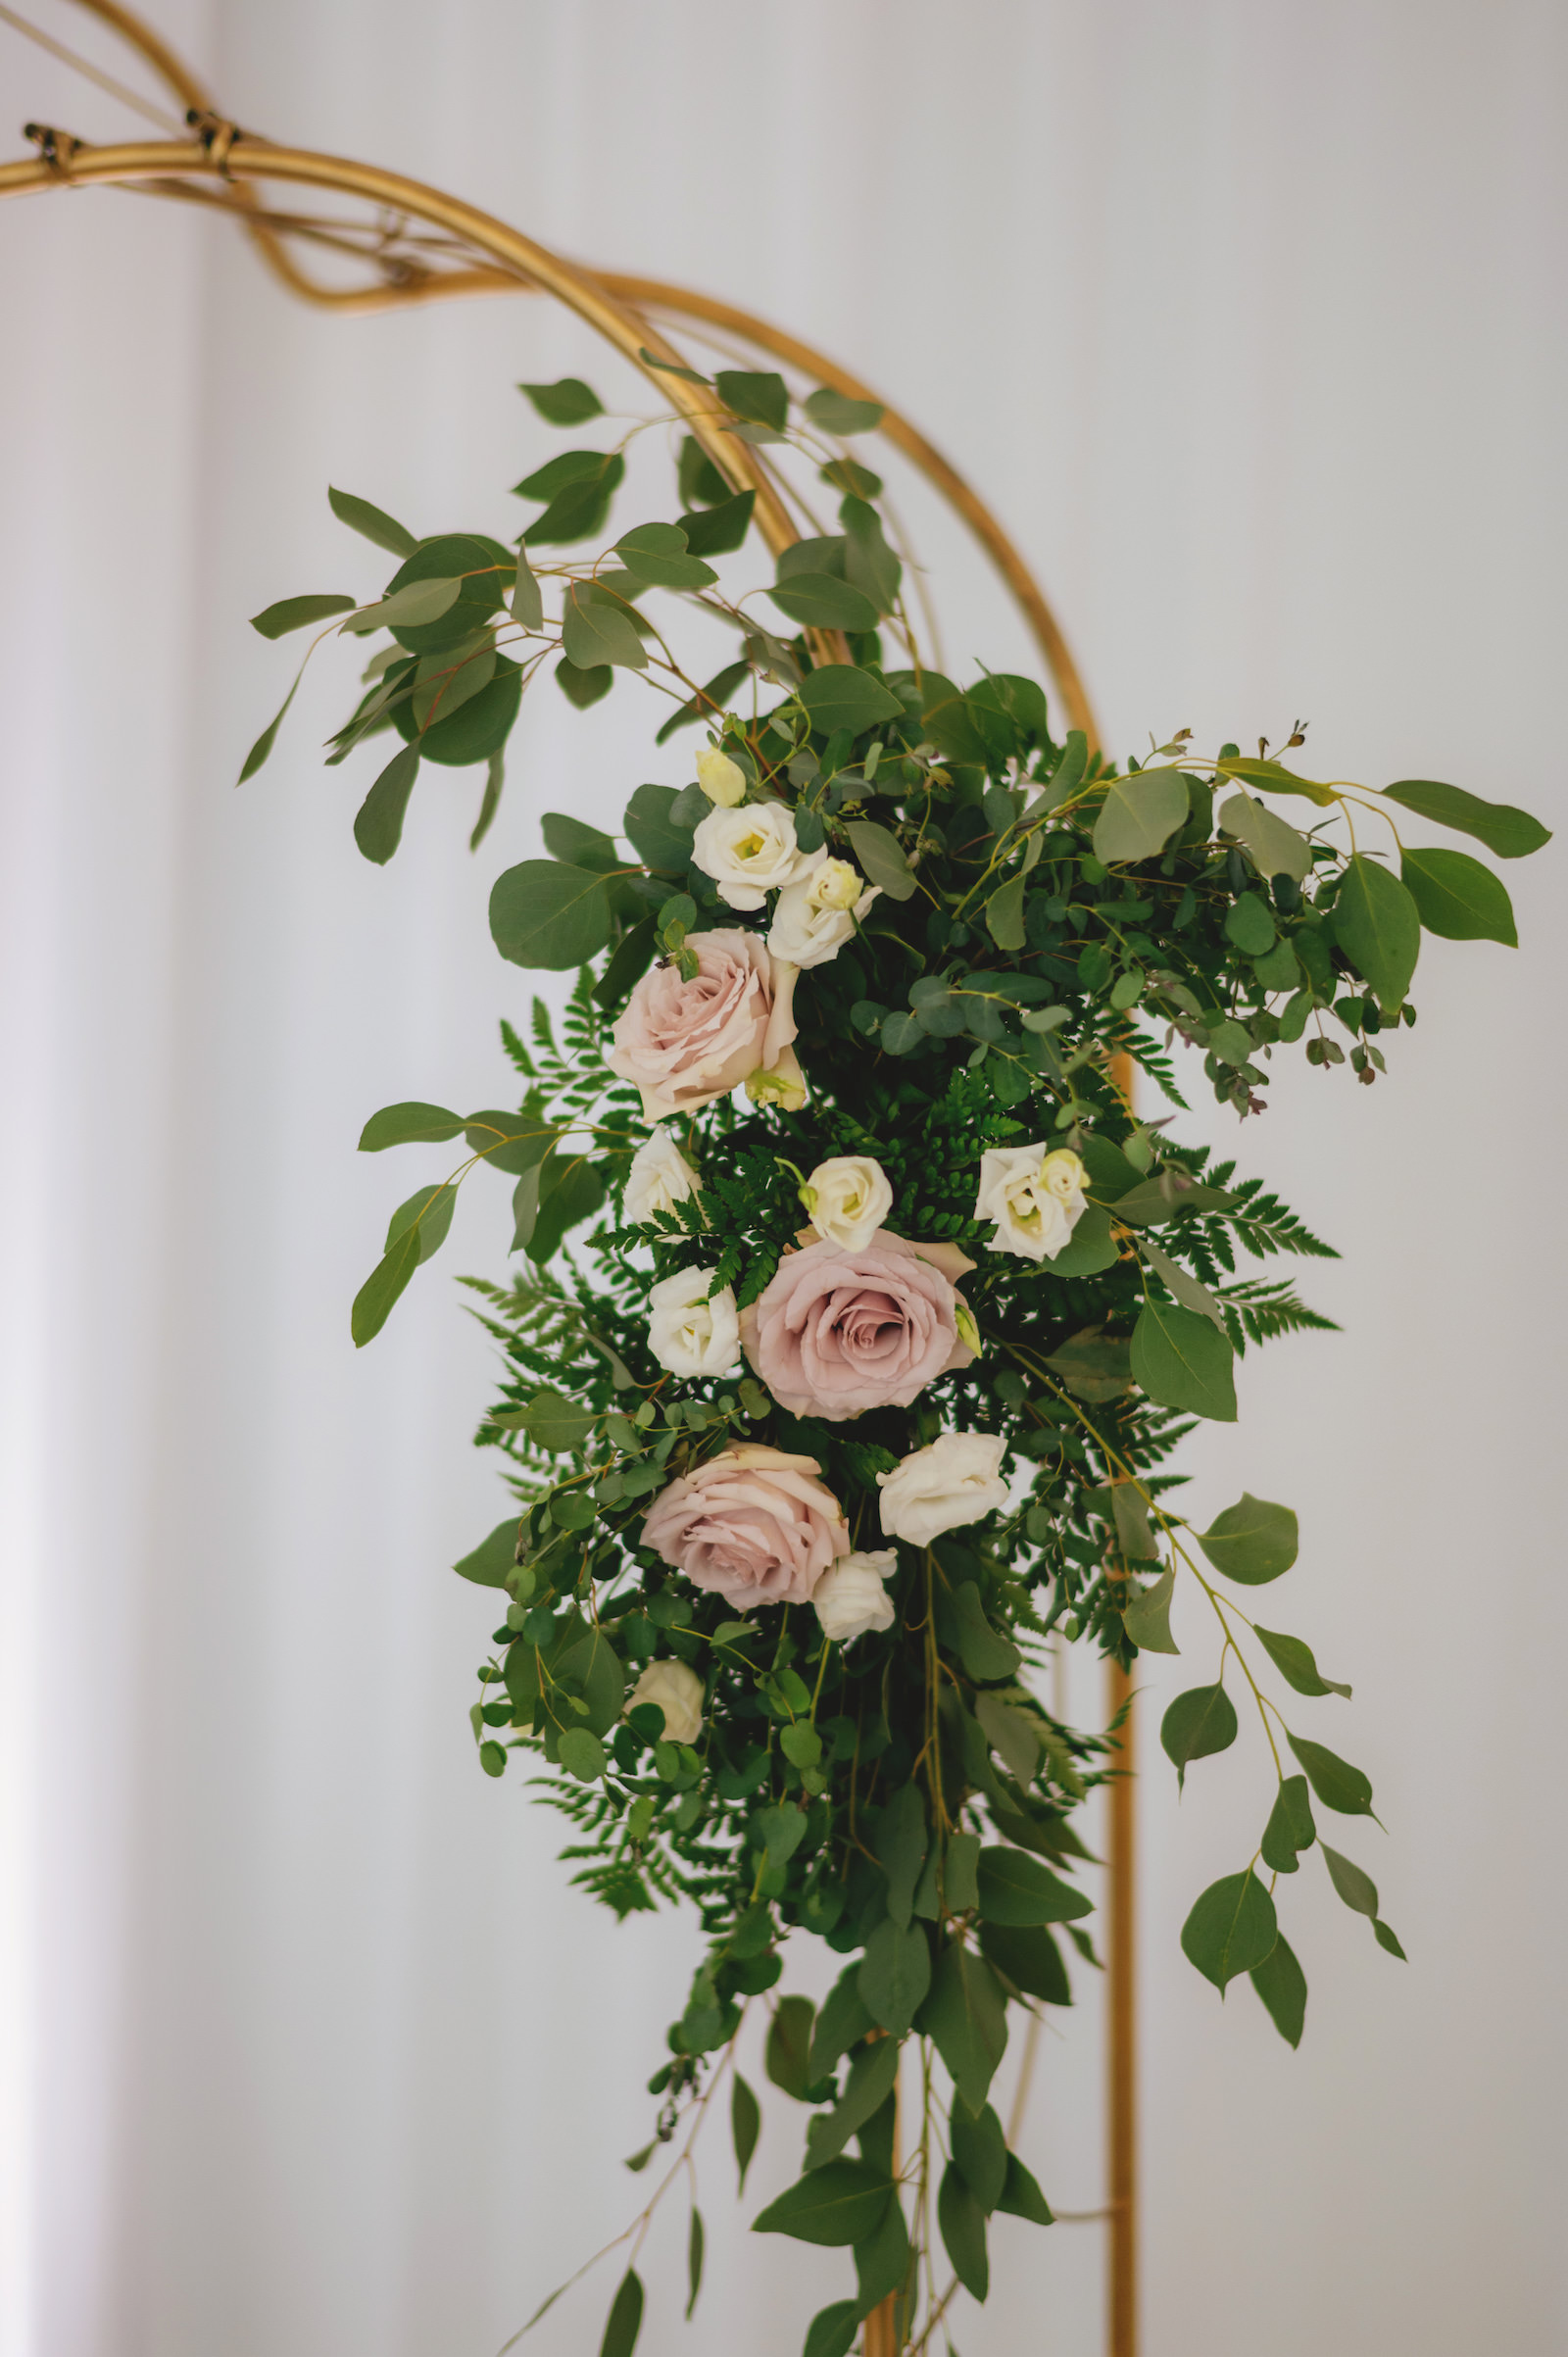 Modern Minimalist Wedding Reception Decor, Unique Arch with Greenery and Blush Pink and White Roses Floral Arrangement